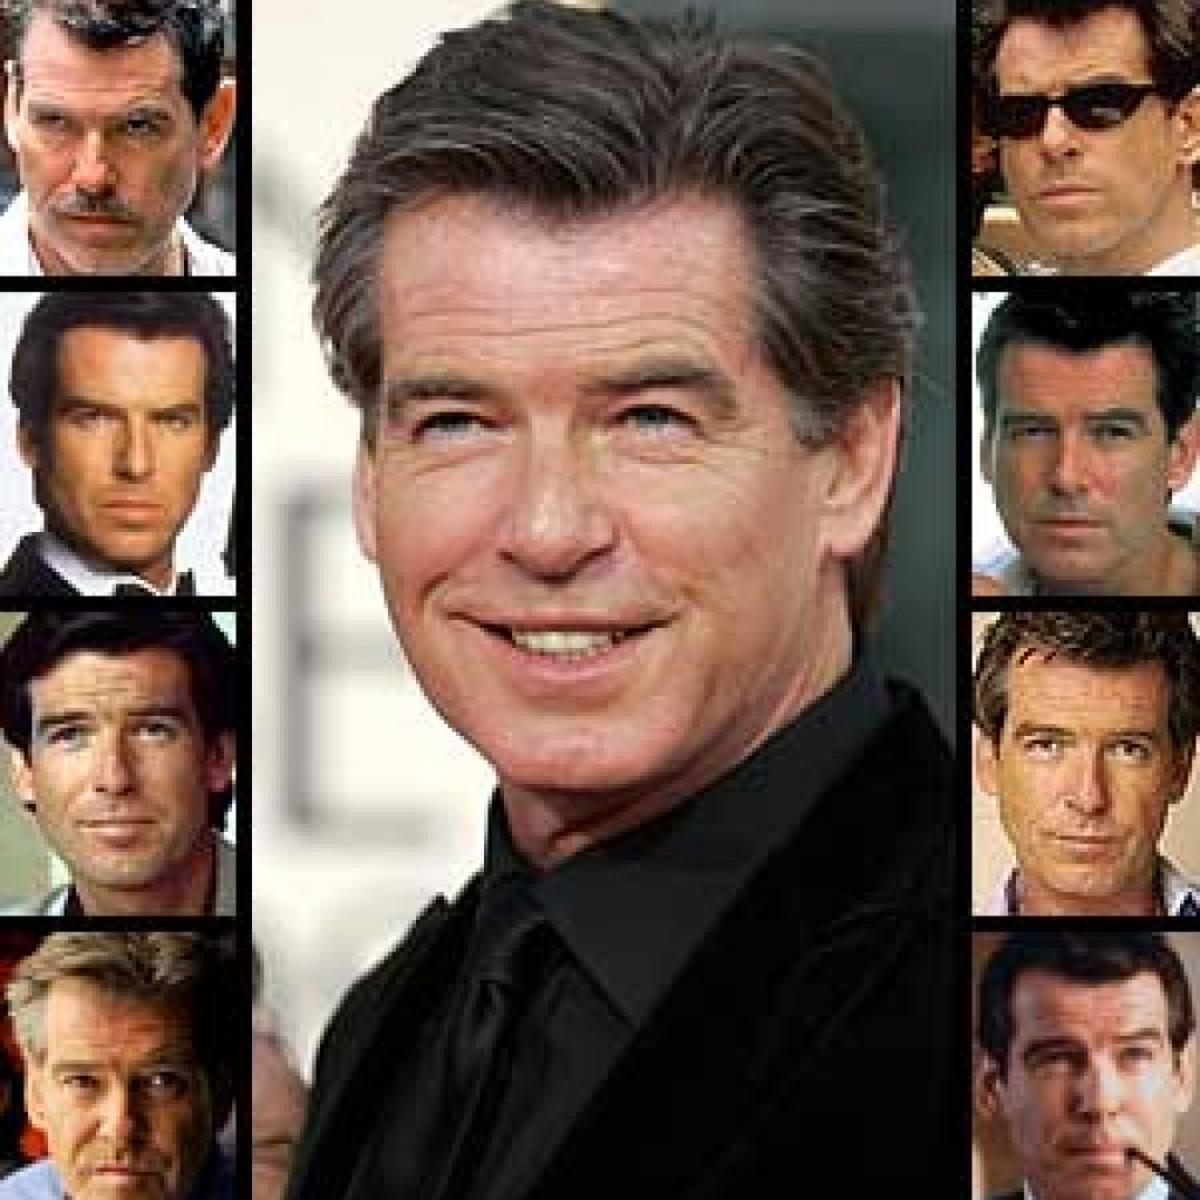 Sherpa S Top 10 Best Pierce Brosnan Movies Joe S St Louis Stltoday Com Here is a list of all the movies pierce brosnan has acted in or produced through his career. best pierce brosnan movies